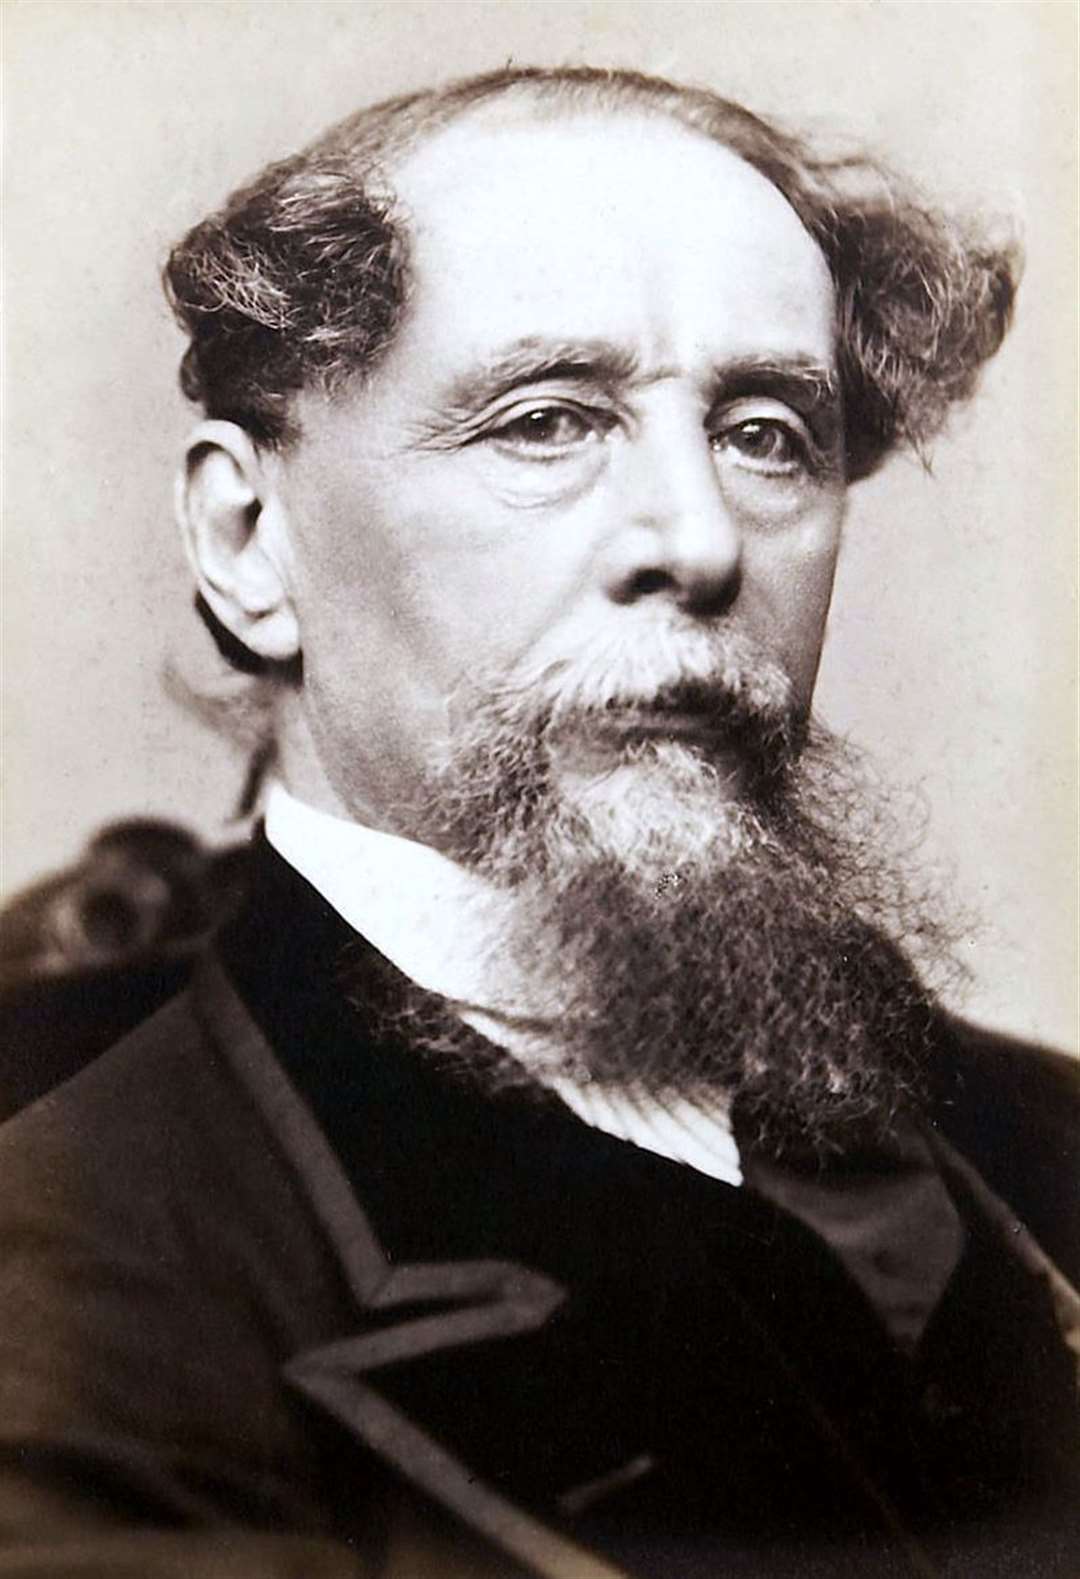 Charles Dickens spent much of his life in Kent